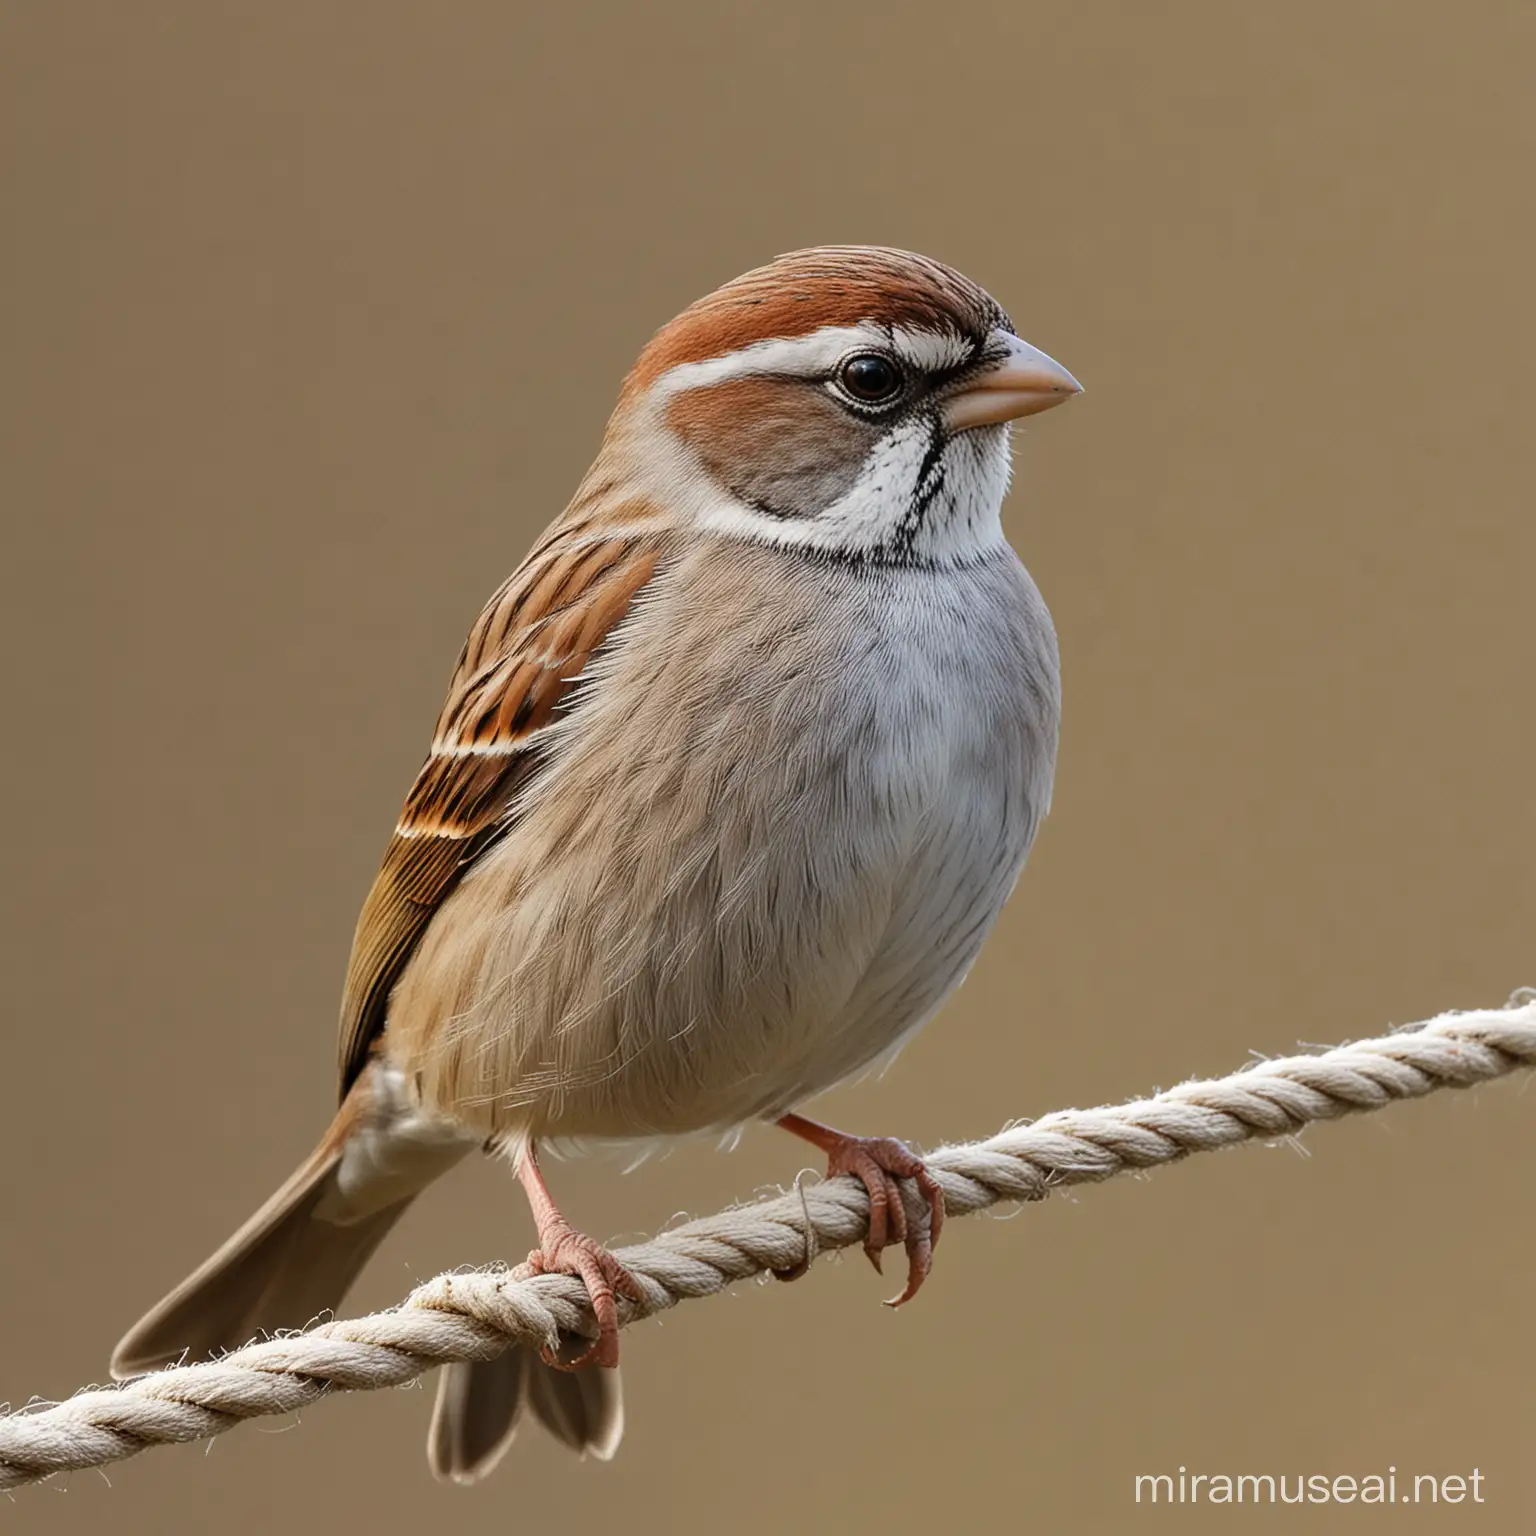 A sparrow with a rope around its neck